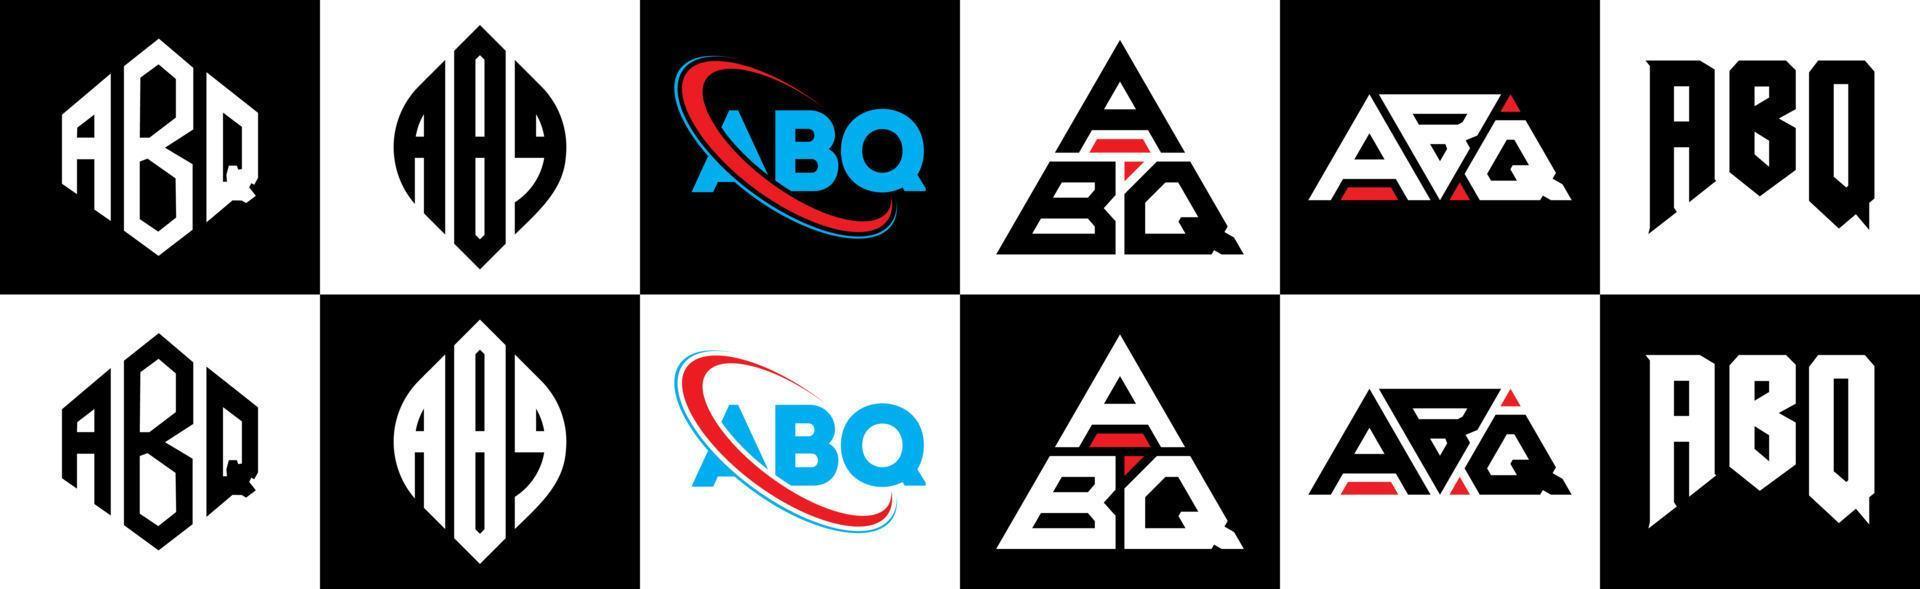 ABQ letter logo design in six style. ABQ polygon, circle, triangle, hexagon, flat and simple style with black and white color variation letter logo set in one artboard. ABQ minimalist and classic logo vector